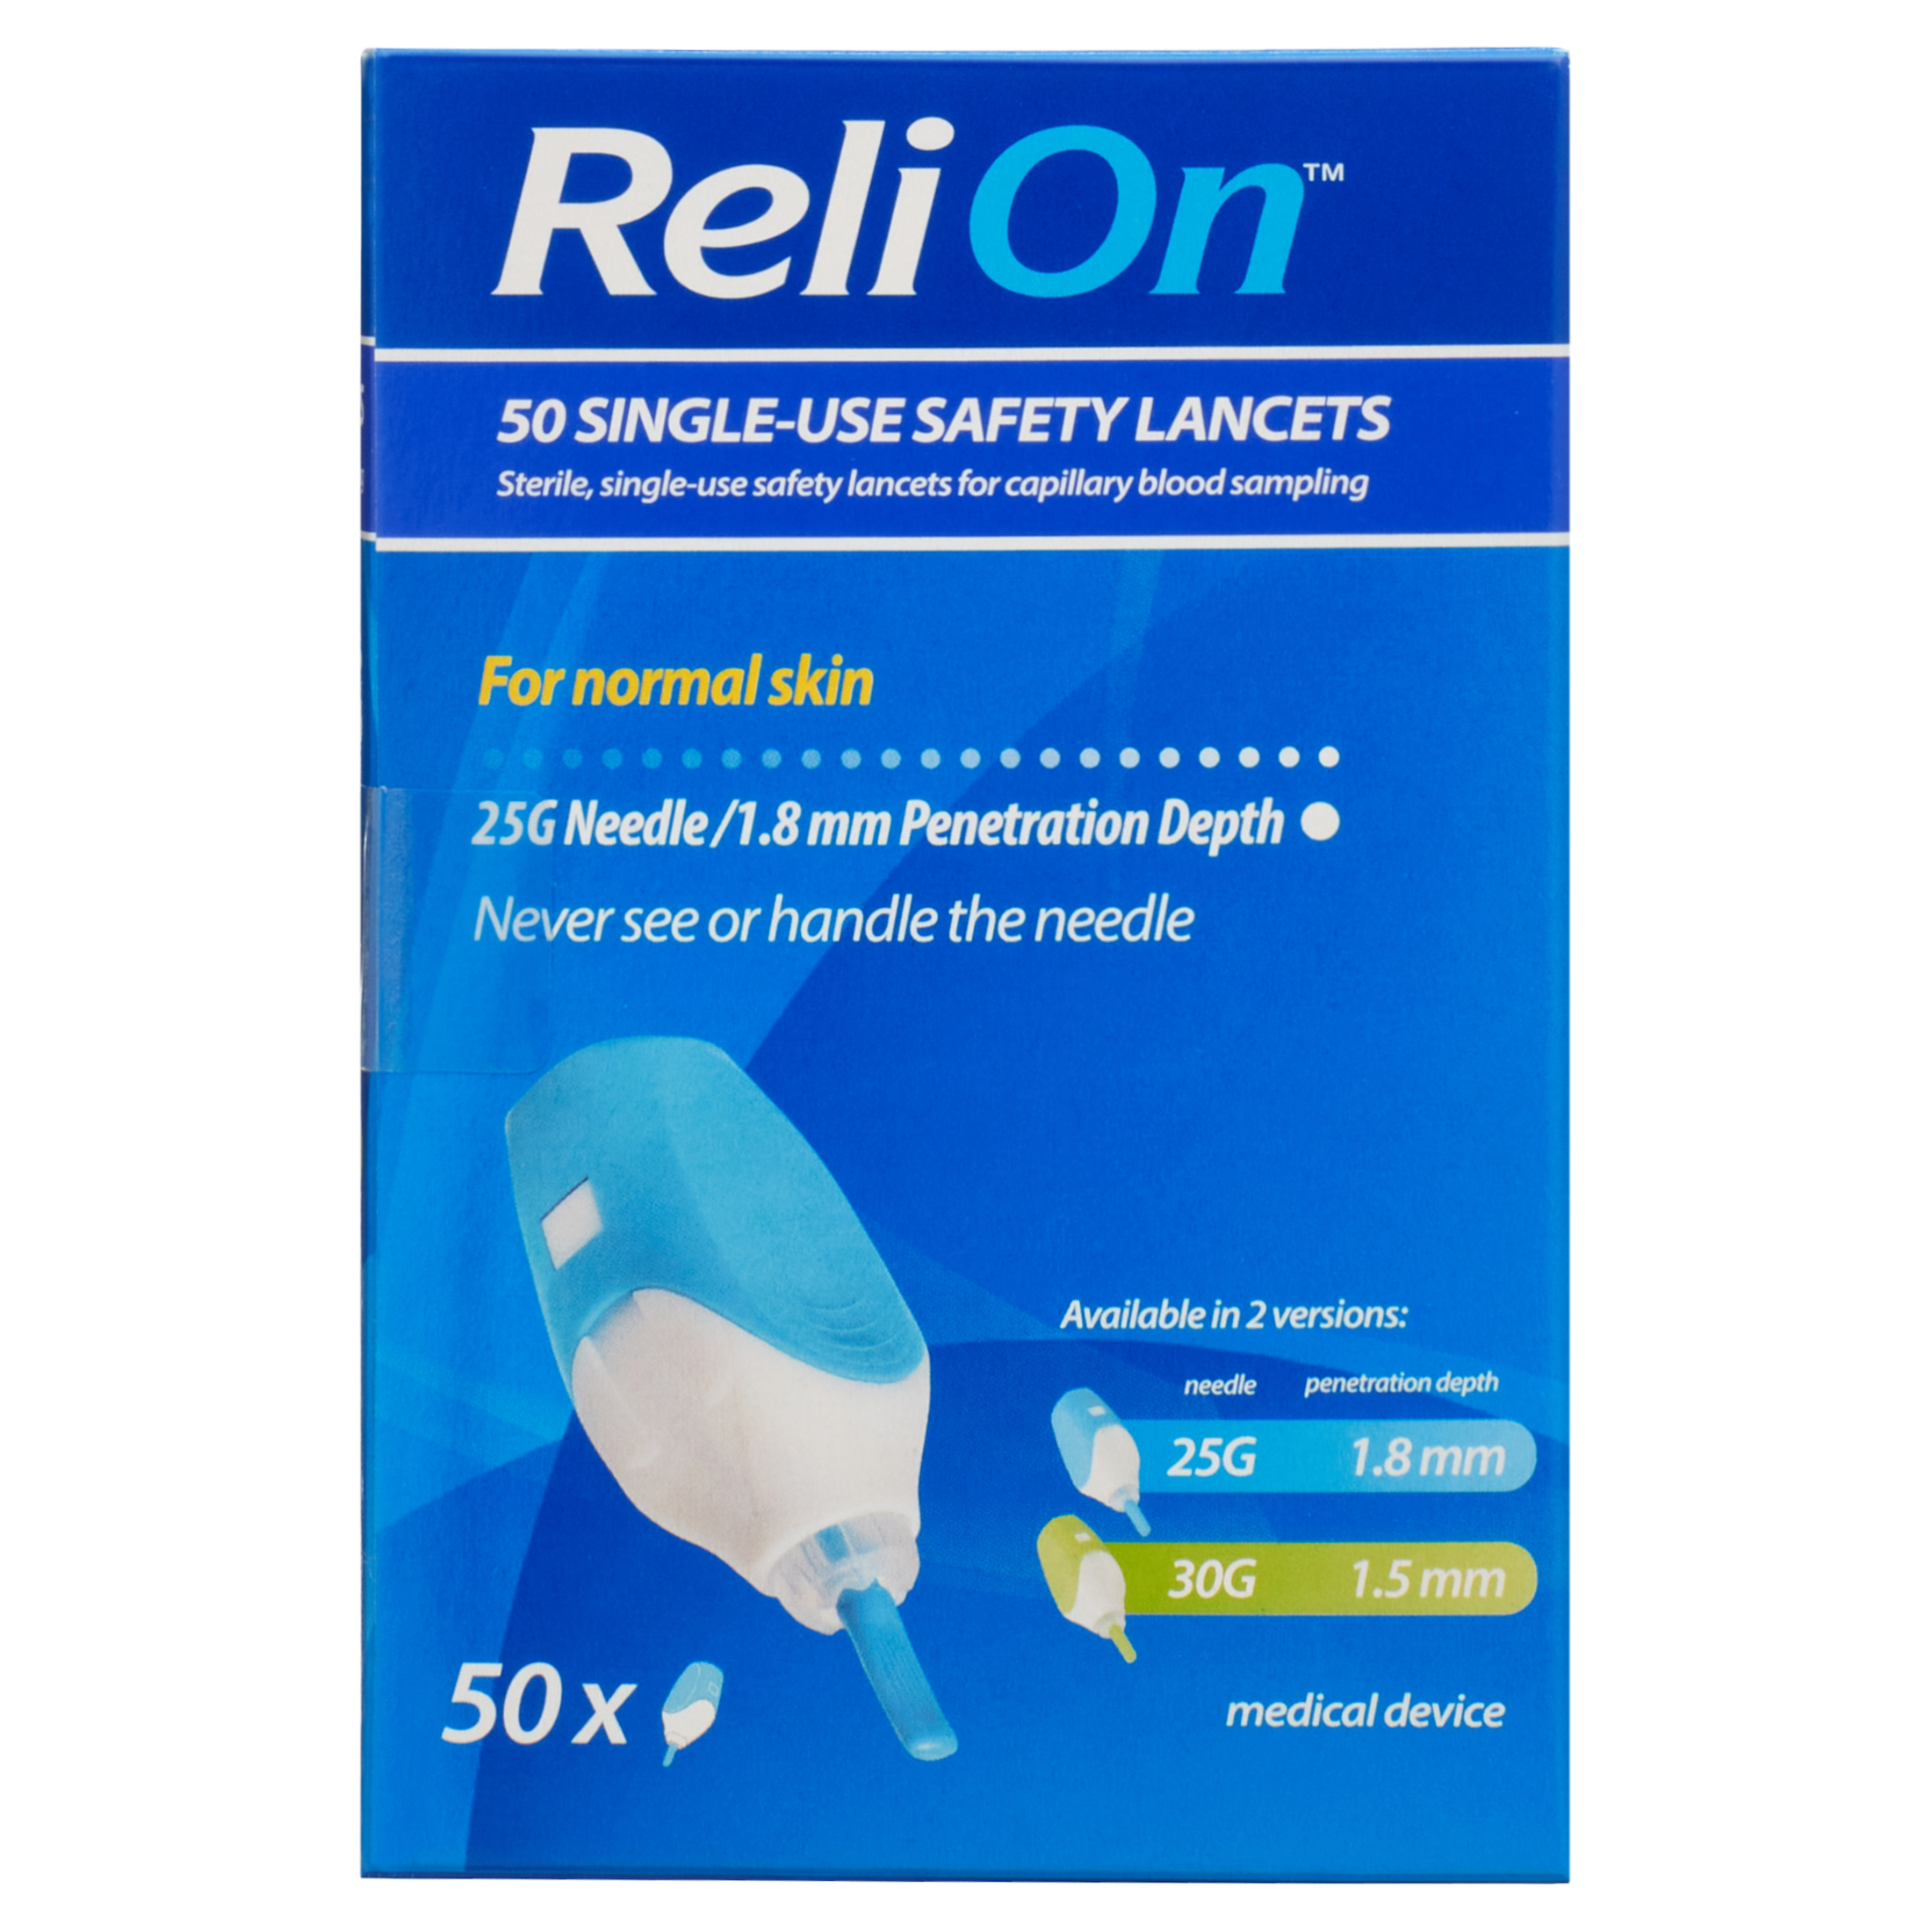 ReliOn Single-Use 2-In-1 Lancing Device for Normal Skin, 25G Needle, 50 Count - image 1 of 8